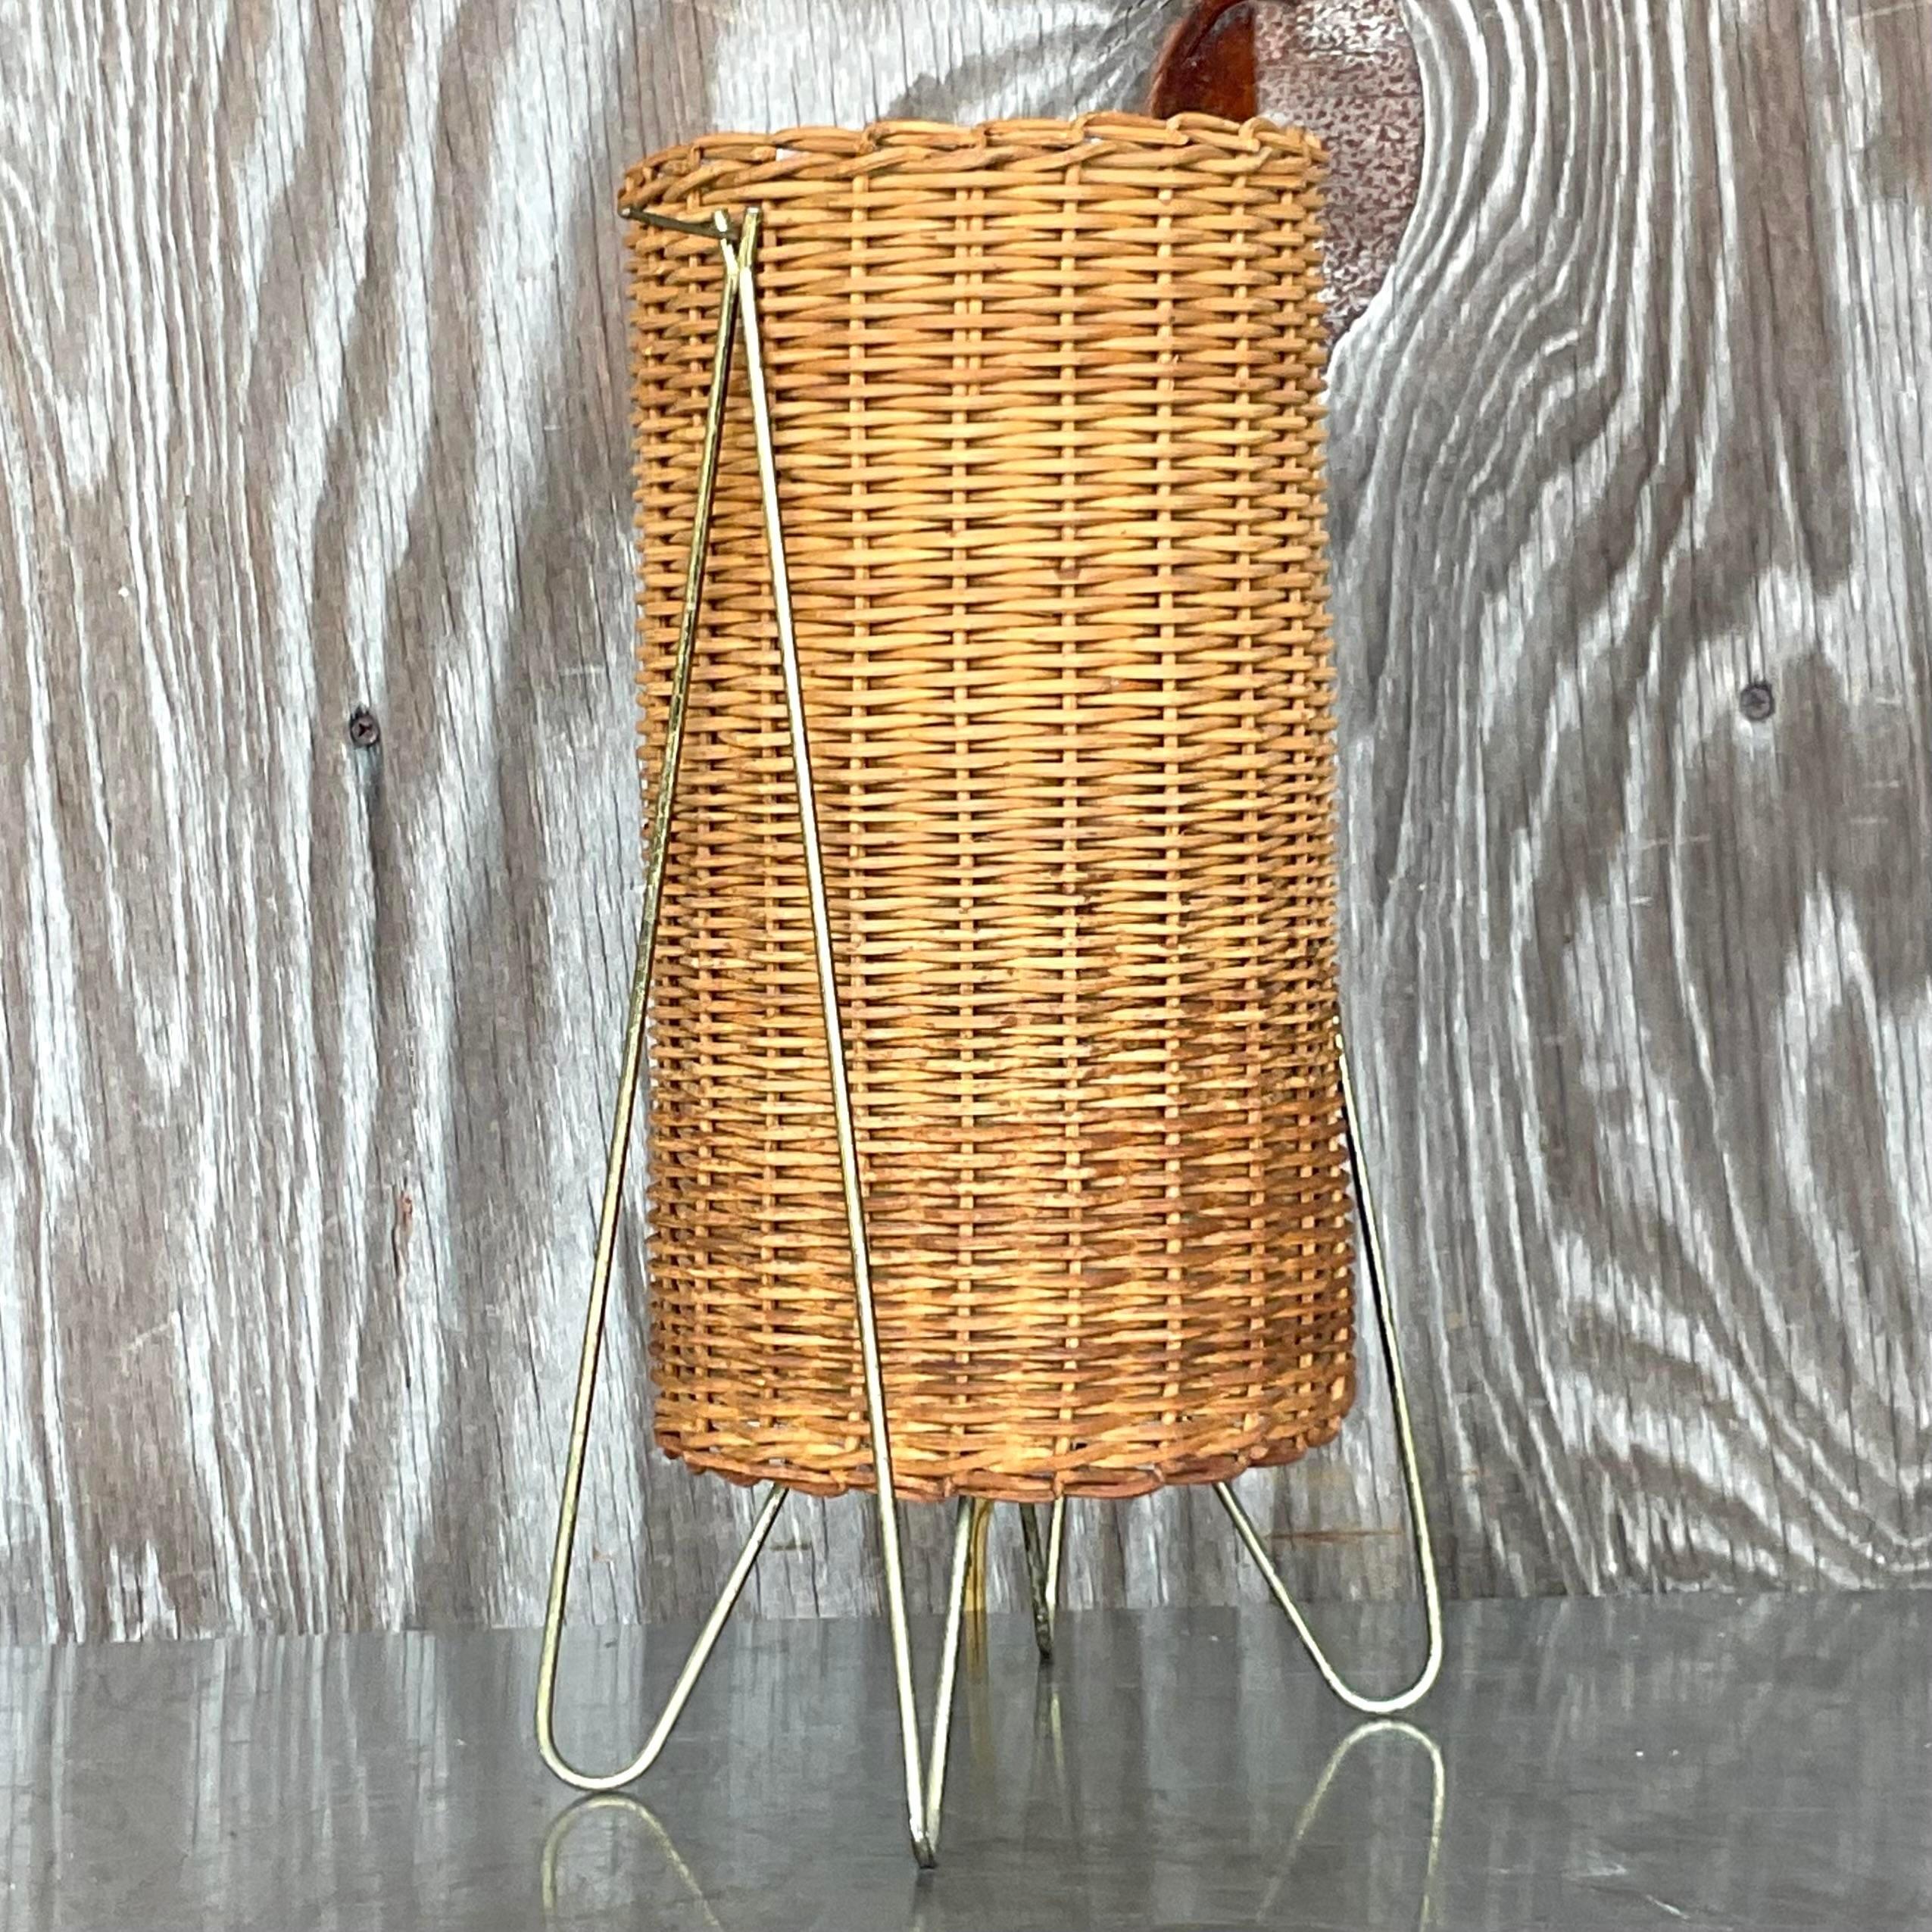 A striking vintage Coastal table lamp. Designed by the iconic Paul Mayen group. Festered in the 1952 MOMA collection. A chic woven rattan cylinder with brass hardware. Acquired from a Palm Beach estate. 